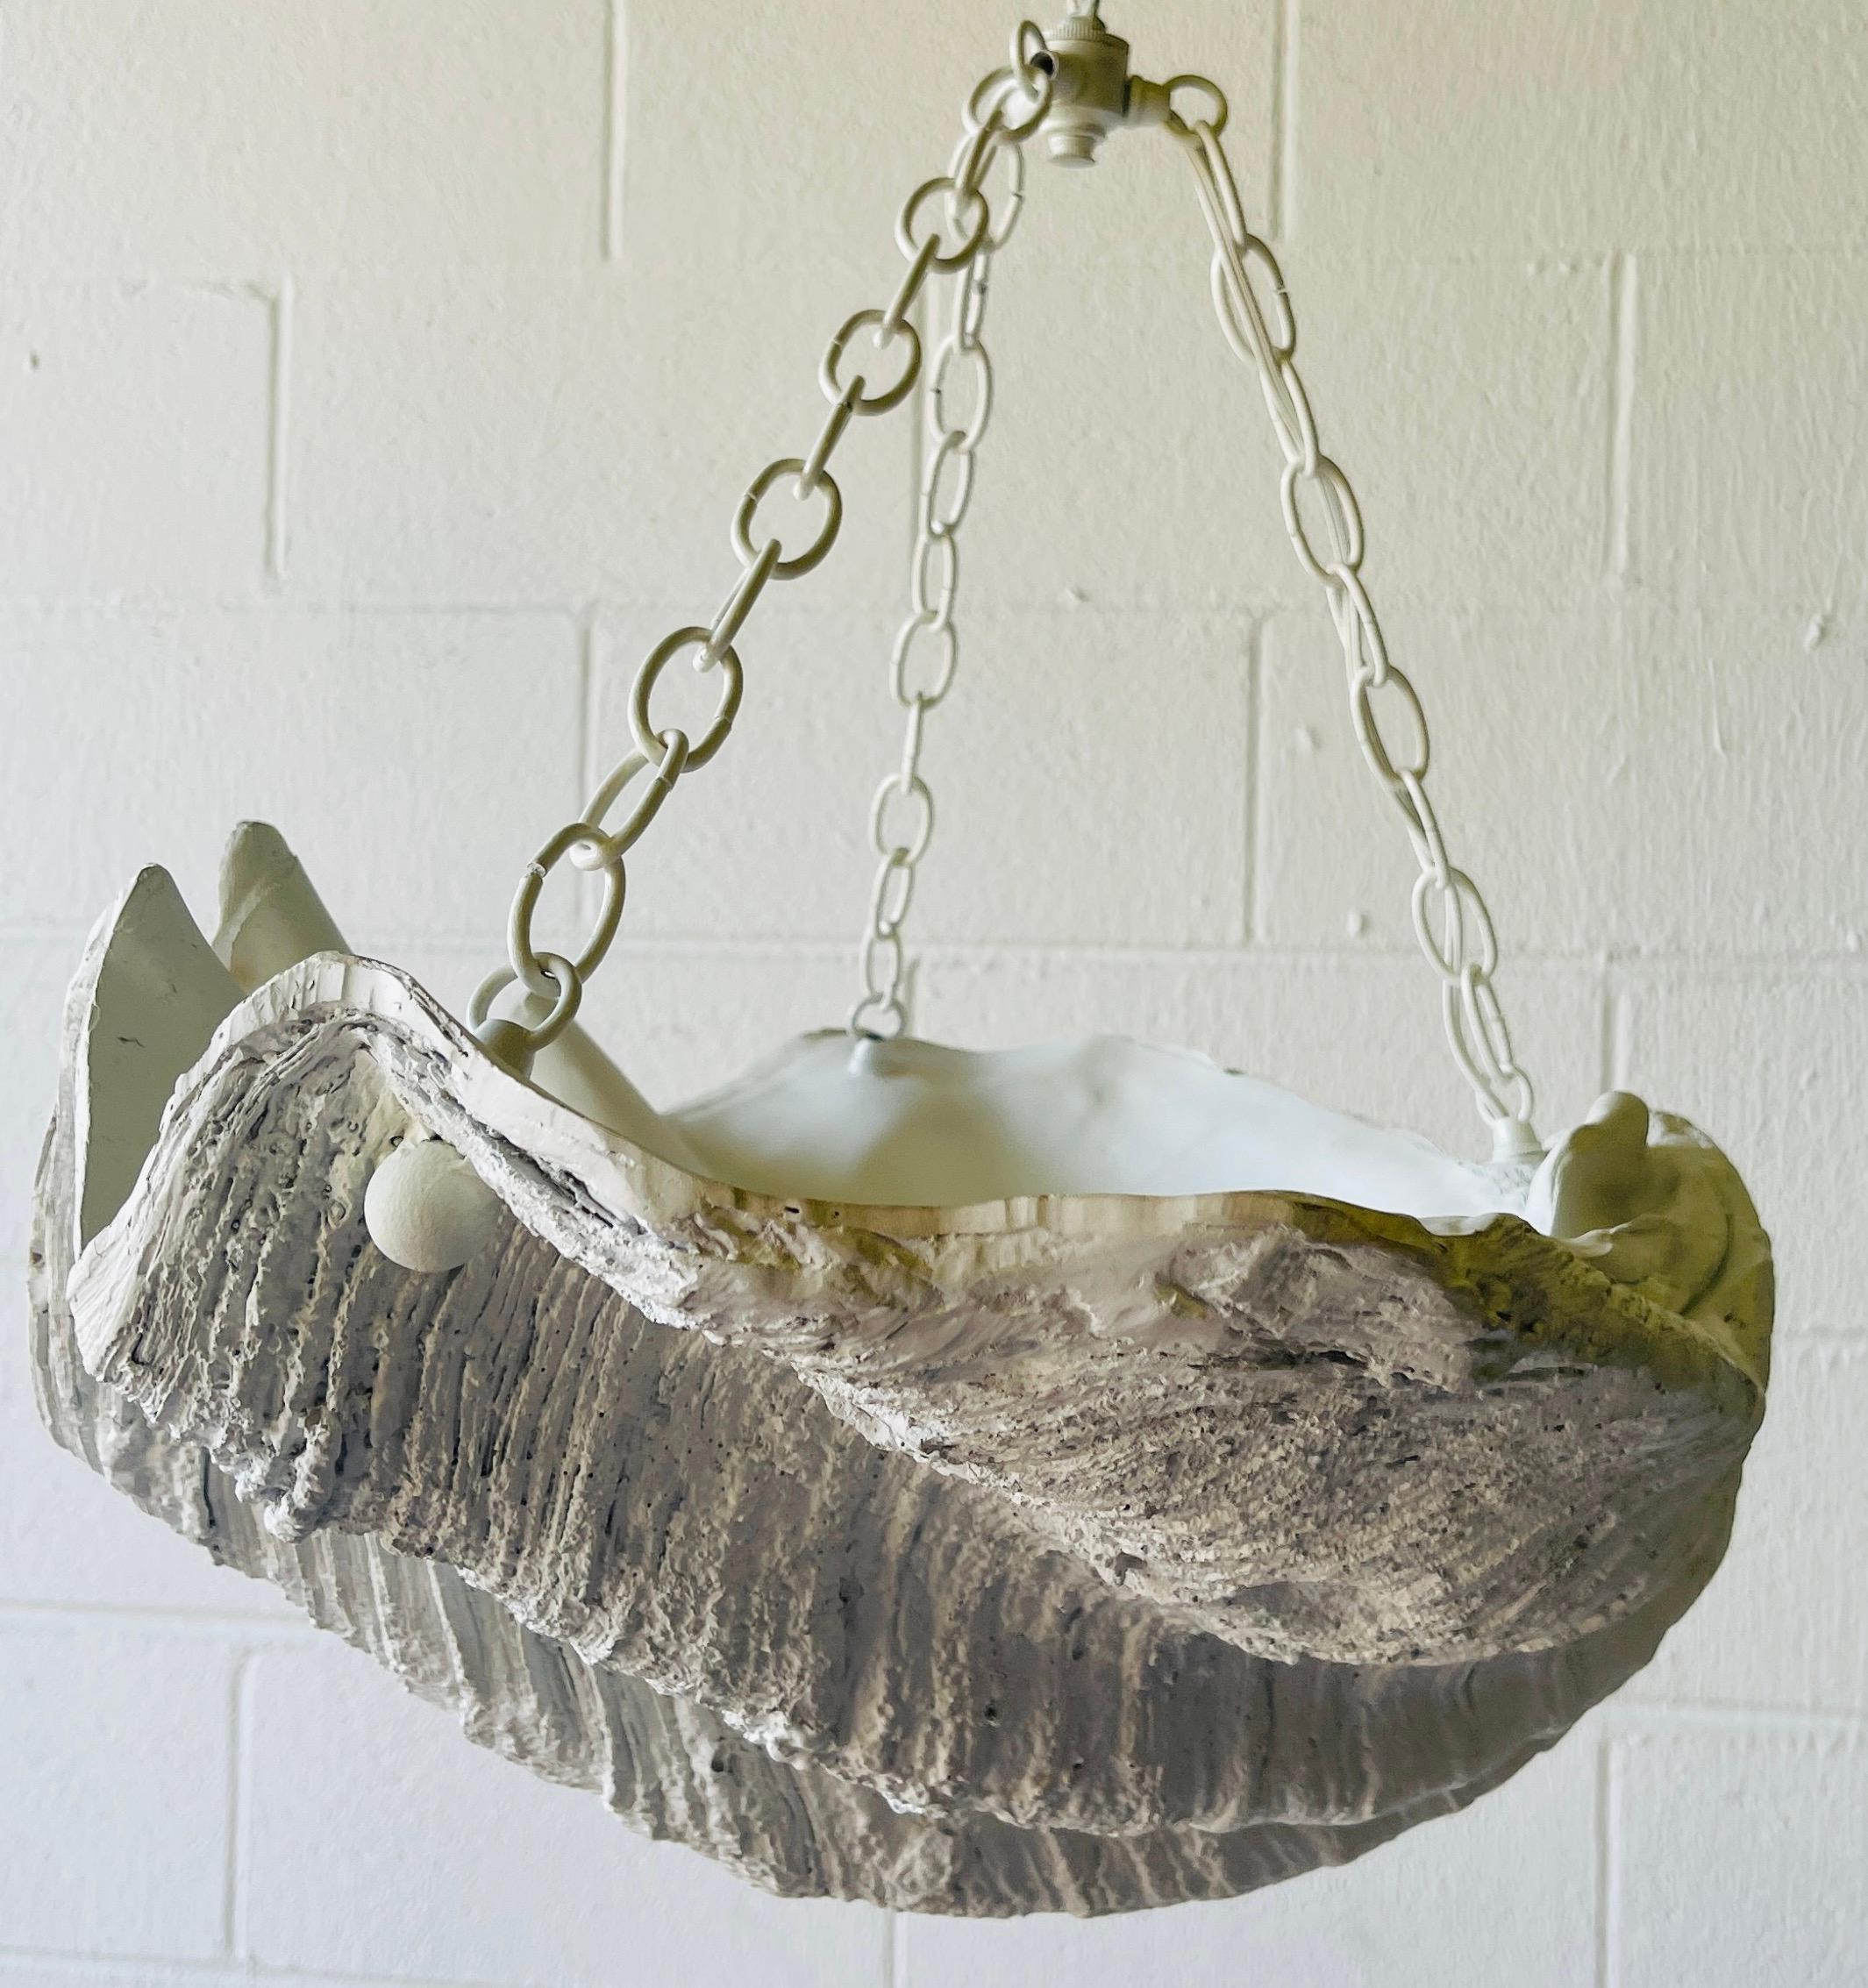 Stunning Large Scale Serge Roche Style Clam Shell Chandelier, Circa 1960s For Sale 1